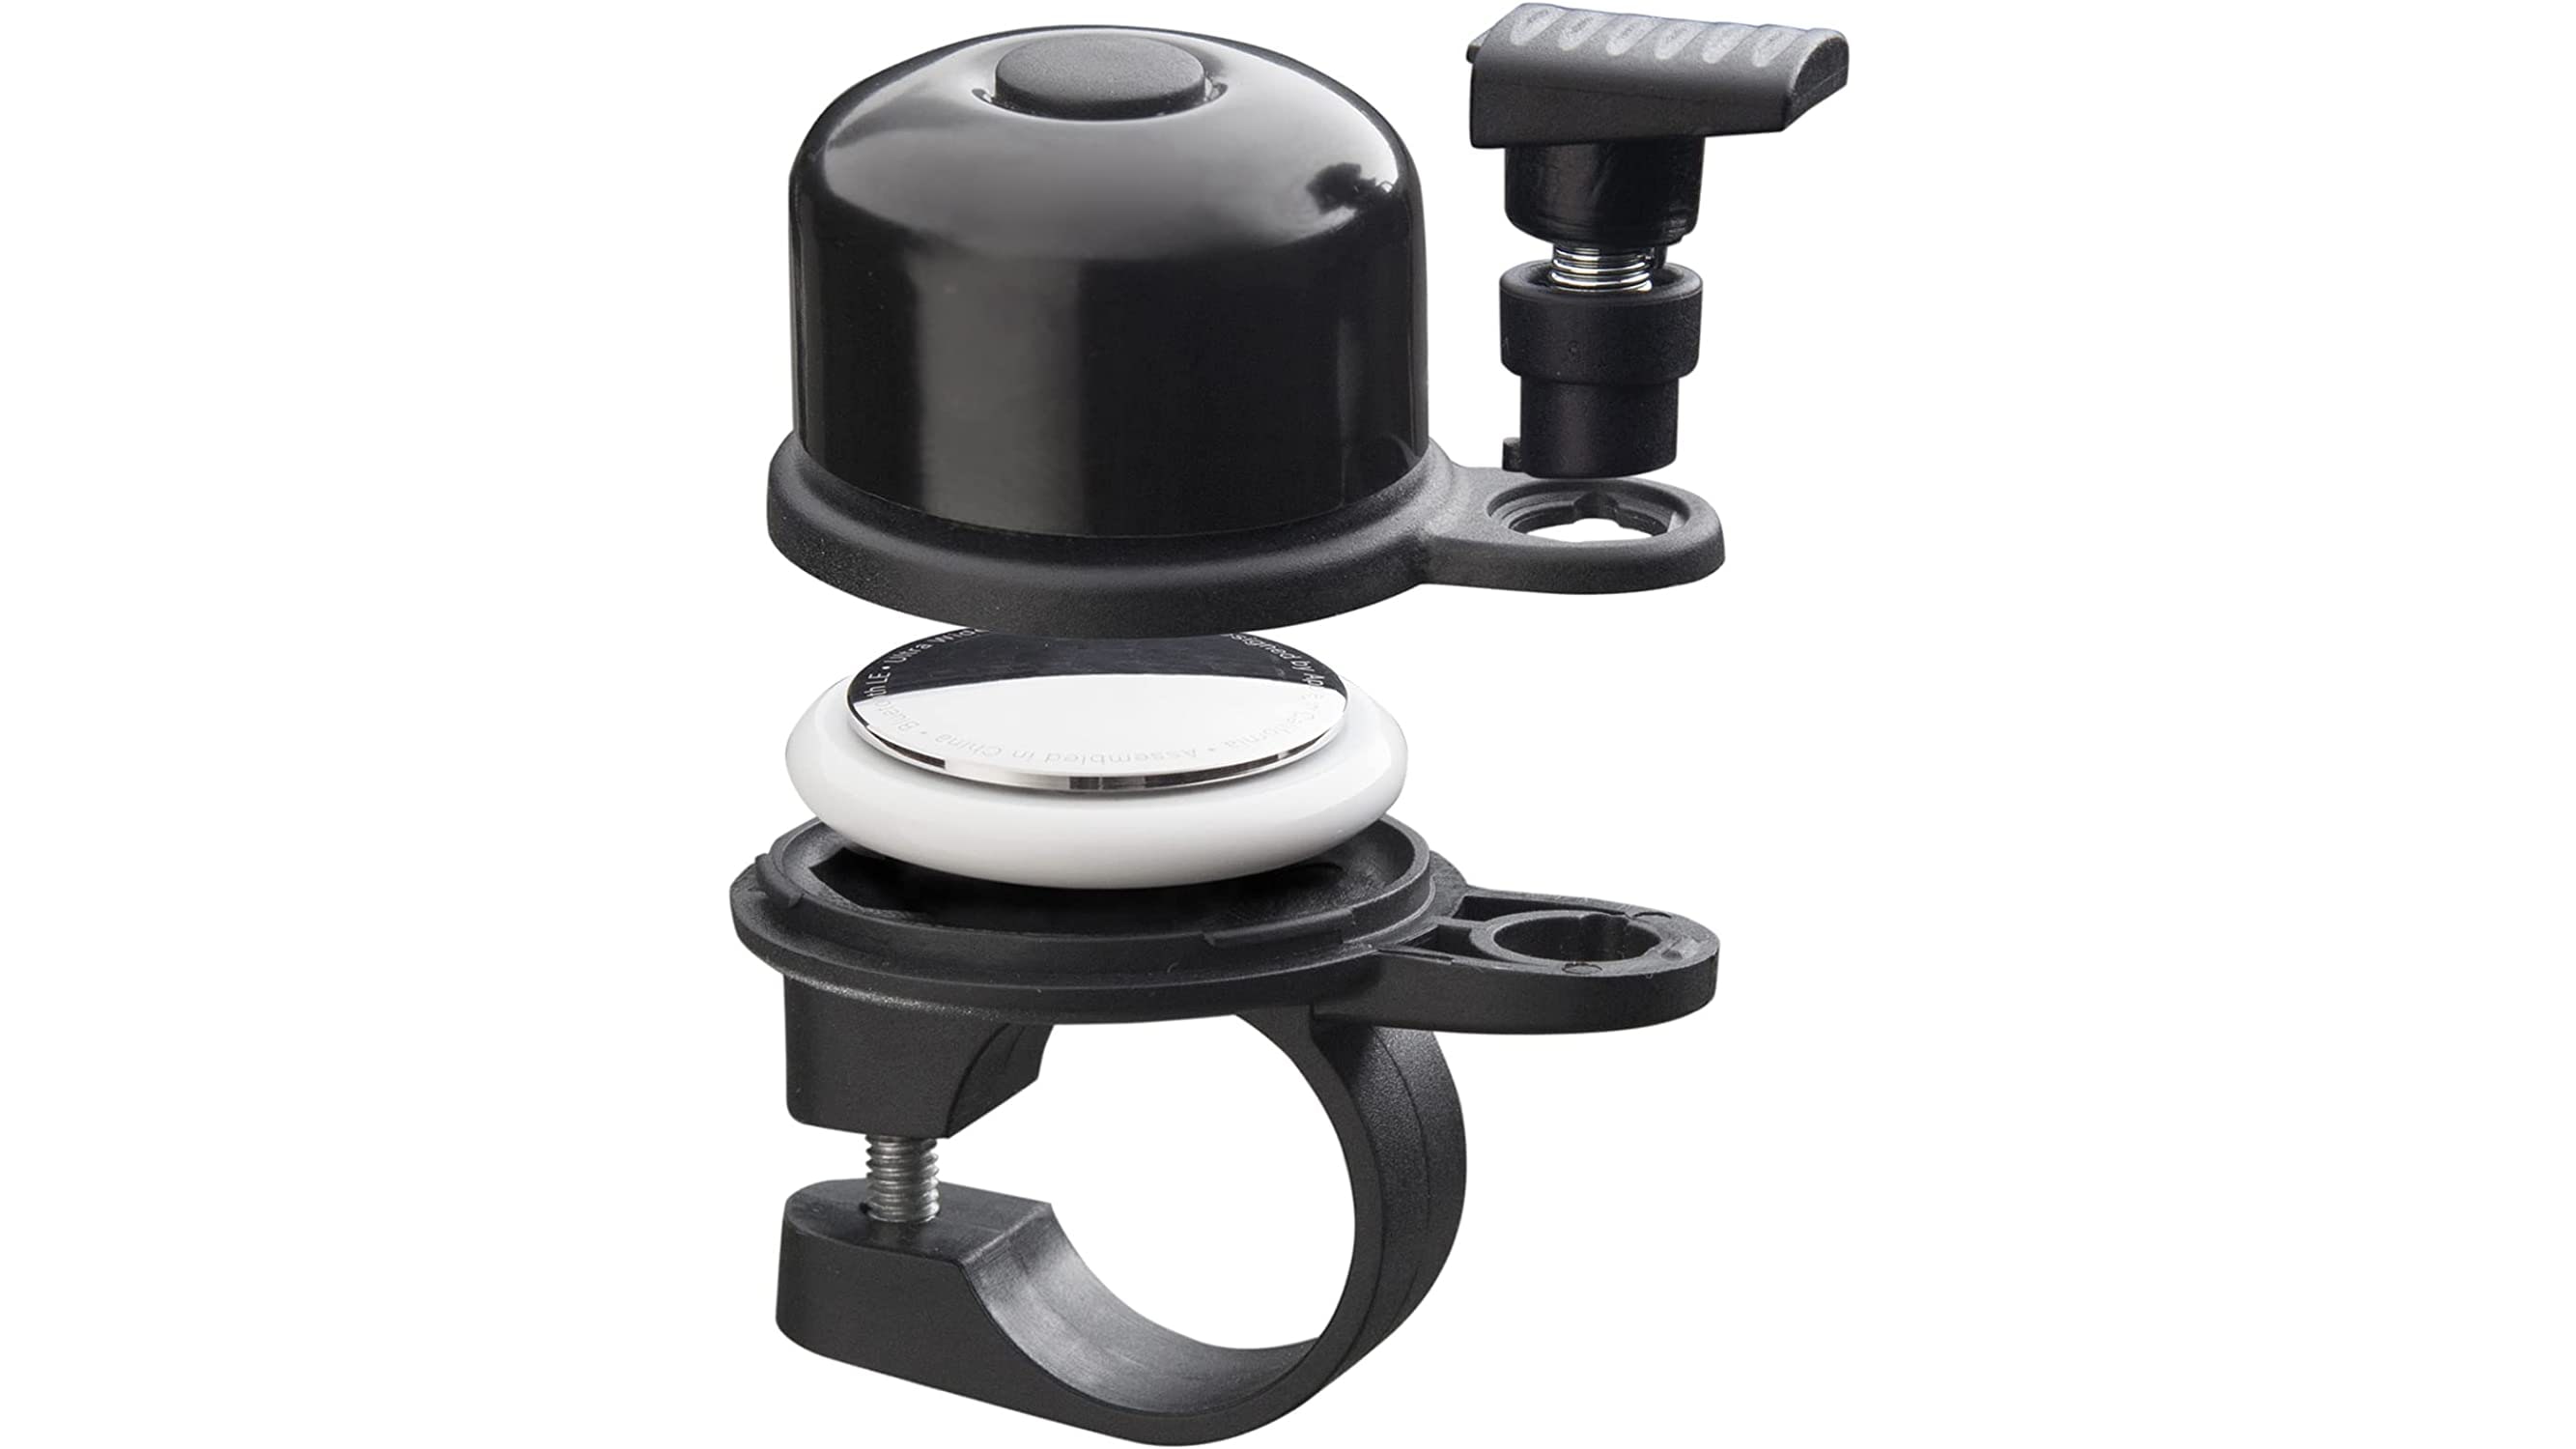 AirBell mechanical bell for bicycles with Apple's AirTag tracker inside